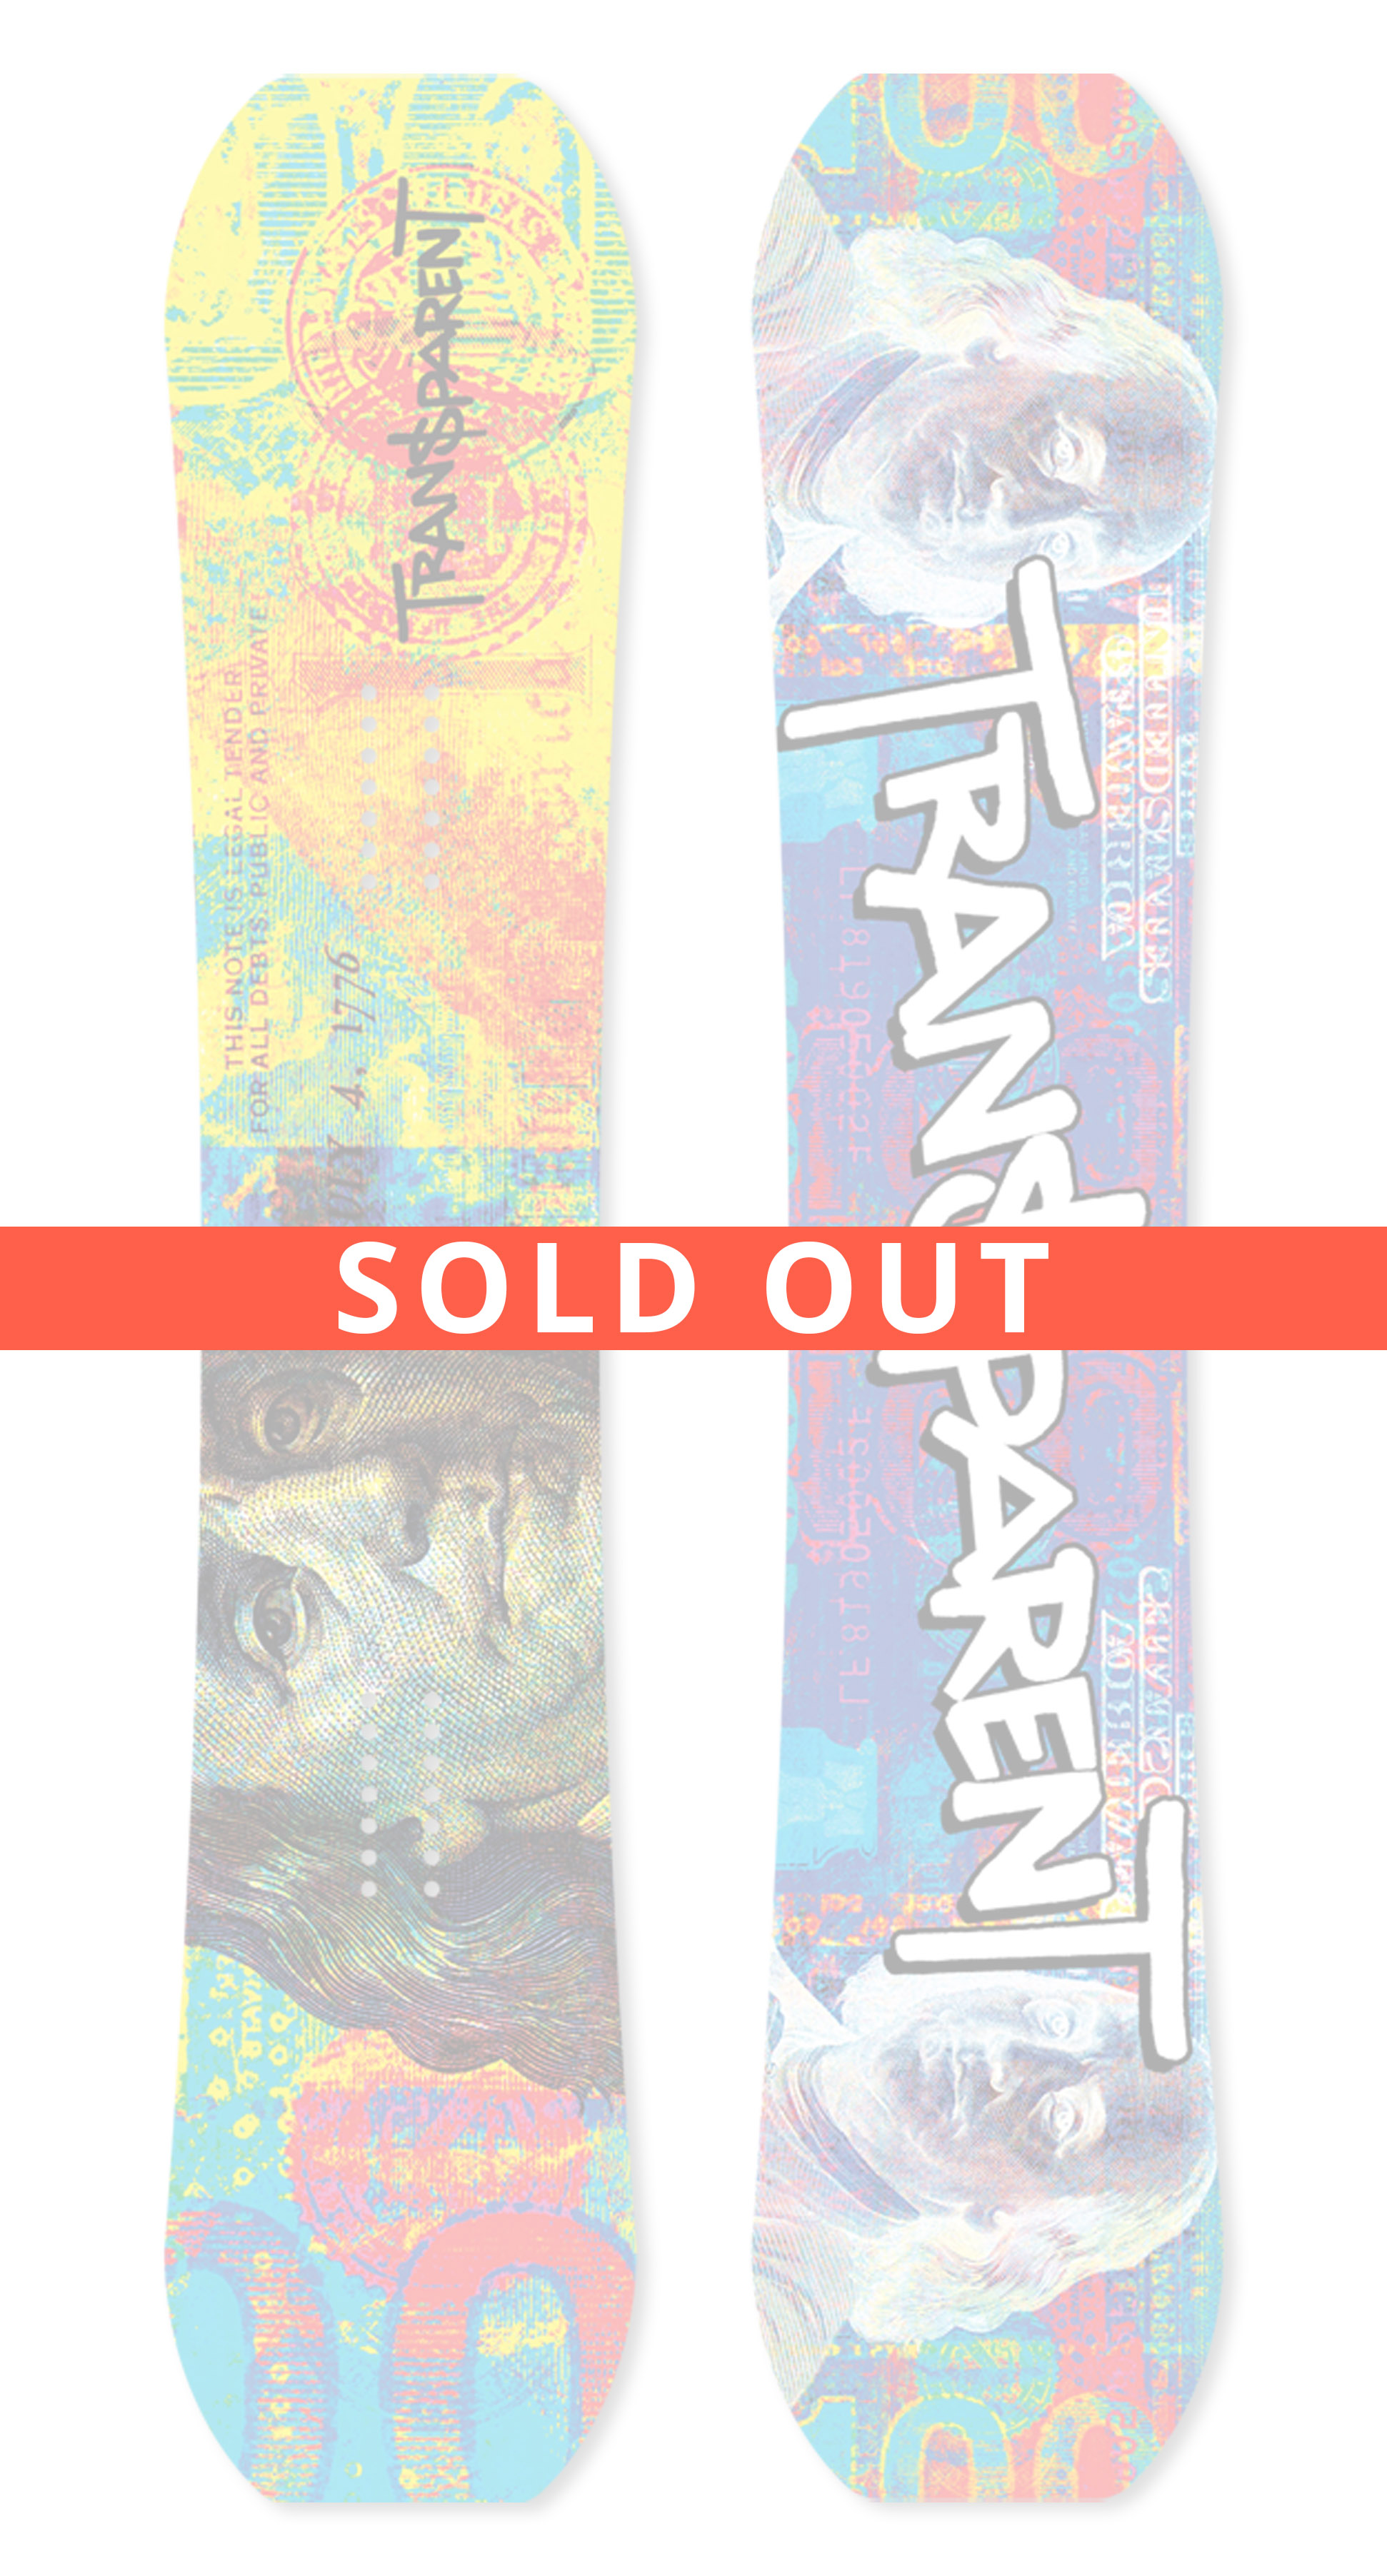 Benjamin sold out large